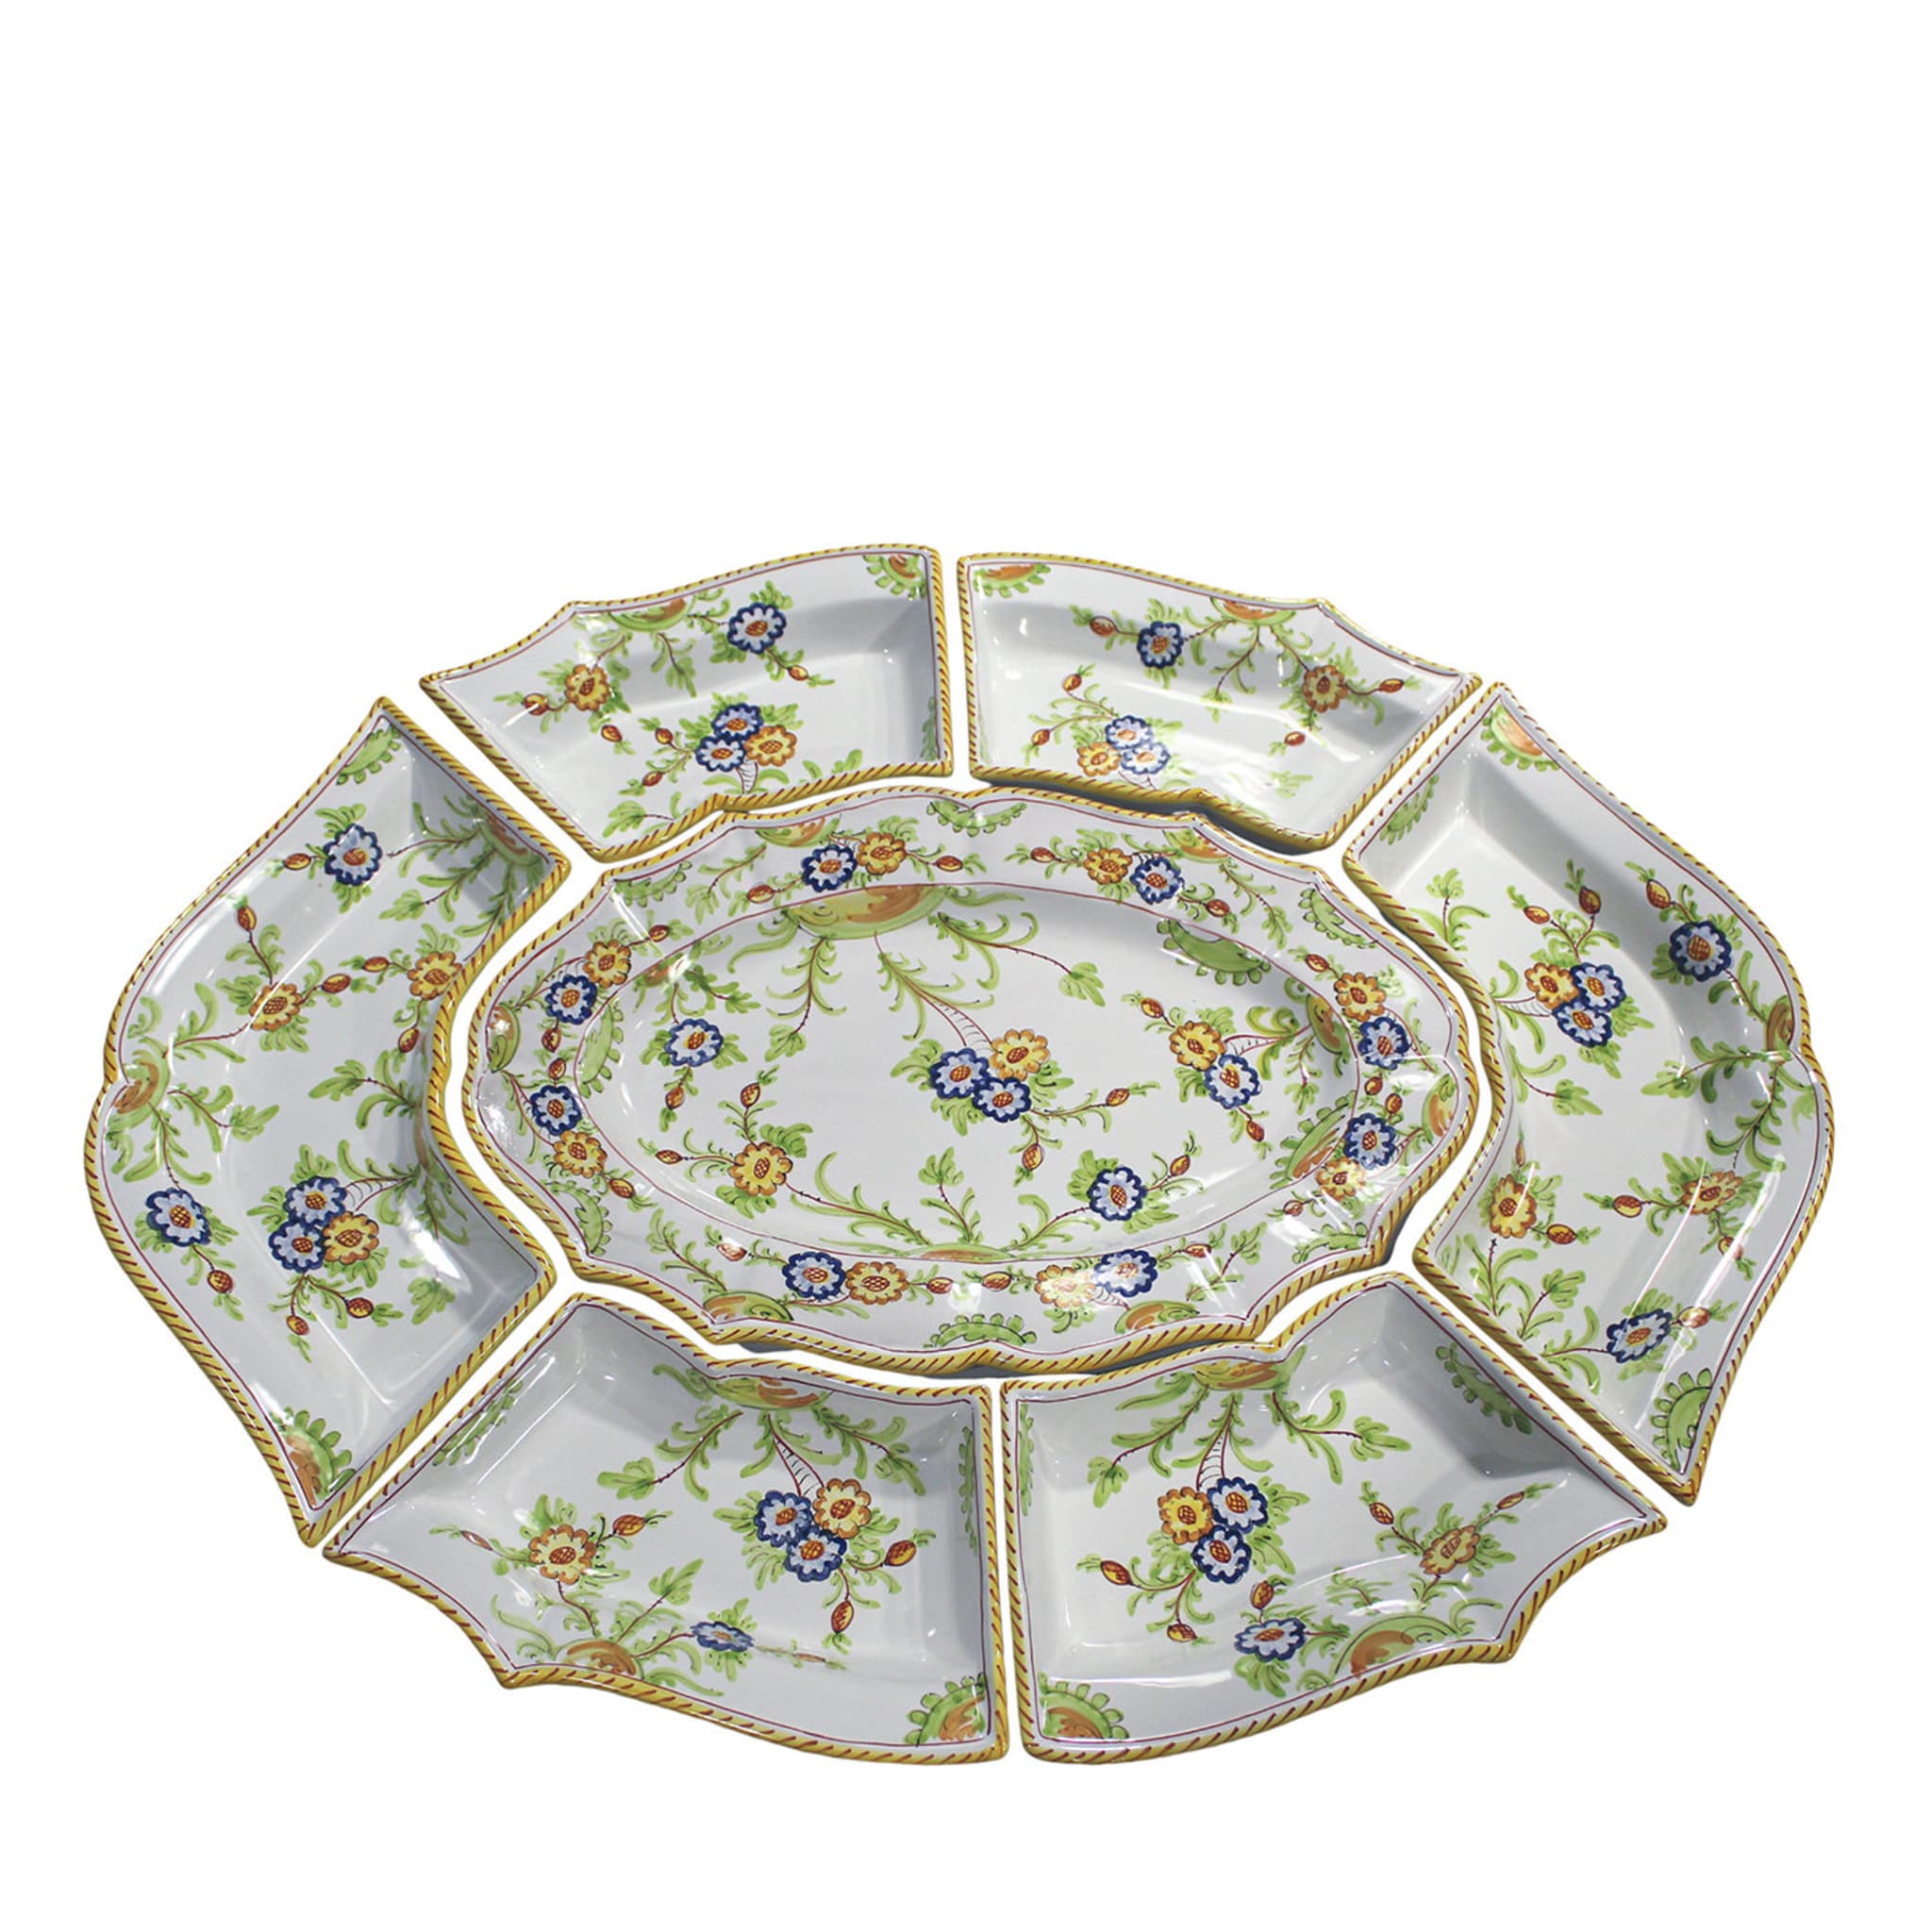 Tuscia Hors d'Oevres Tray by Lorenza Adami - Main view